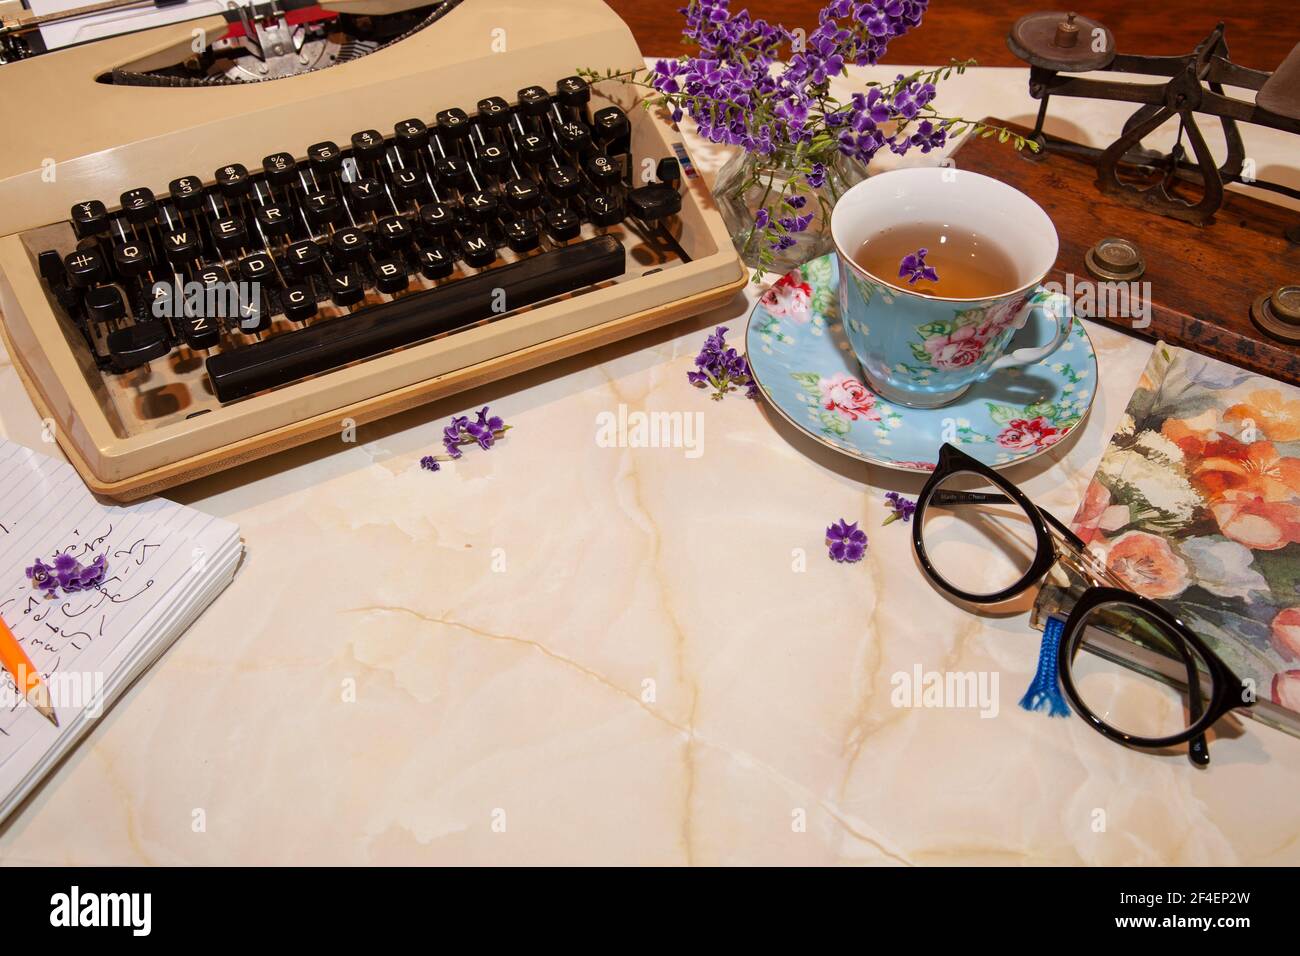 An old fashioned retro manual typewriter on a desk with cup, notepad, spectacles, letter scales and flowers with copy space. Stock Photo